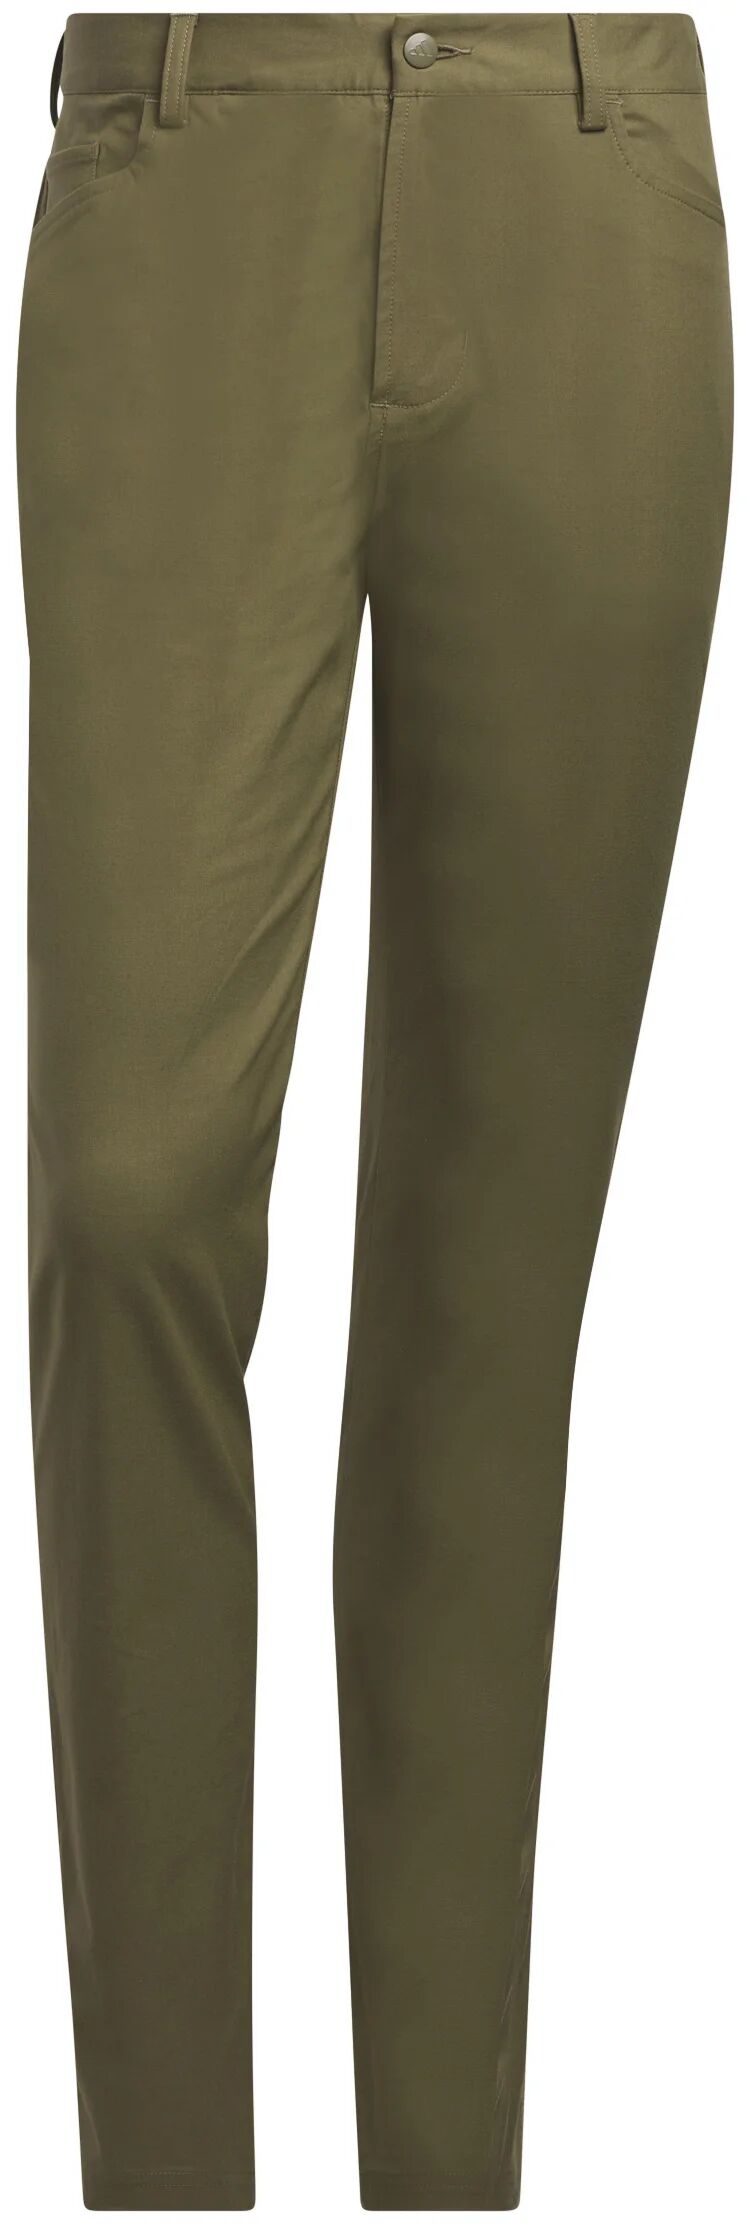 adidas Go-To Five-Pocket Tapered Fit Men's Golf Pants - Green, Size: 40x32